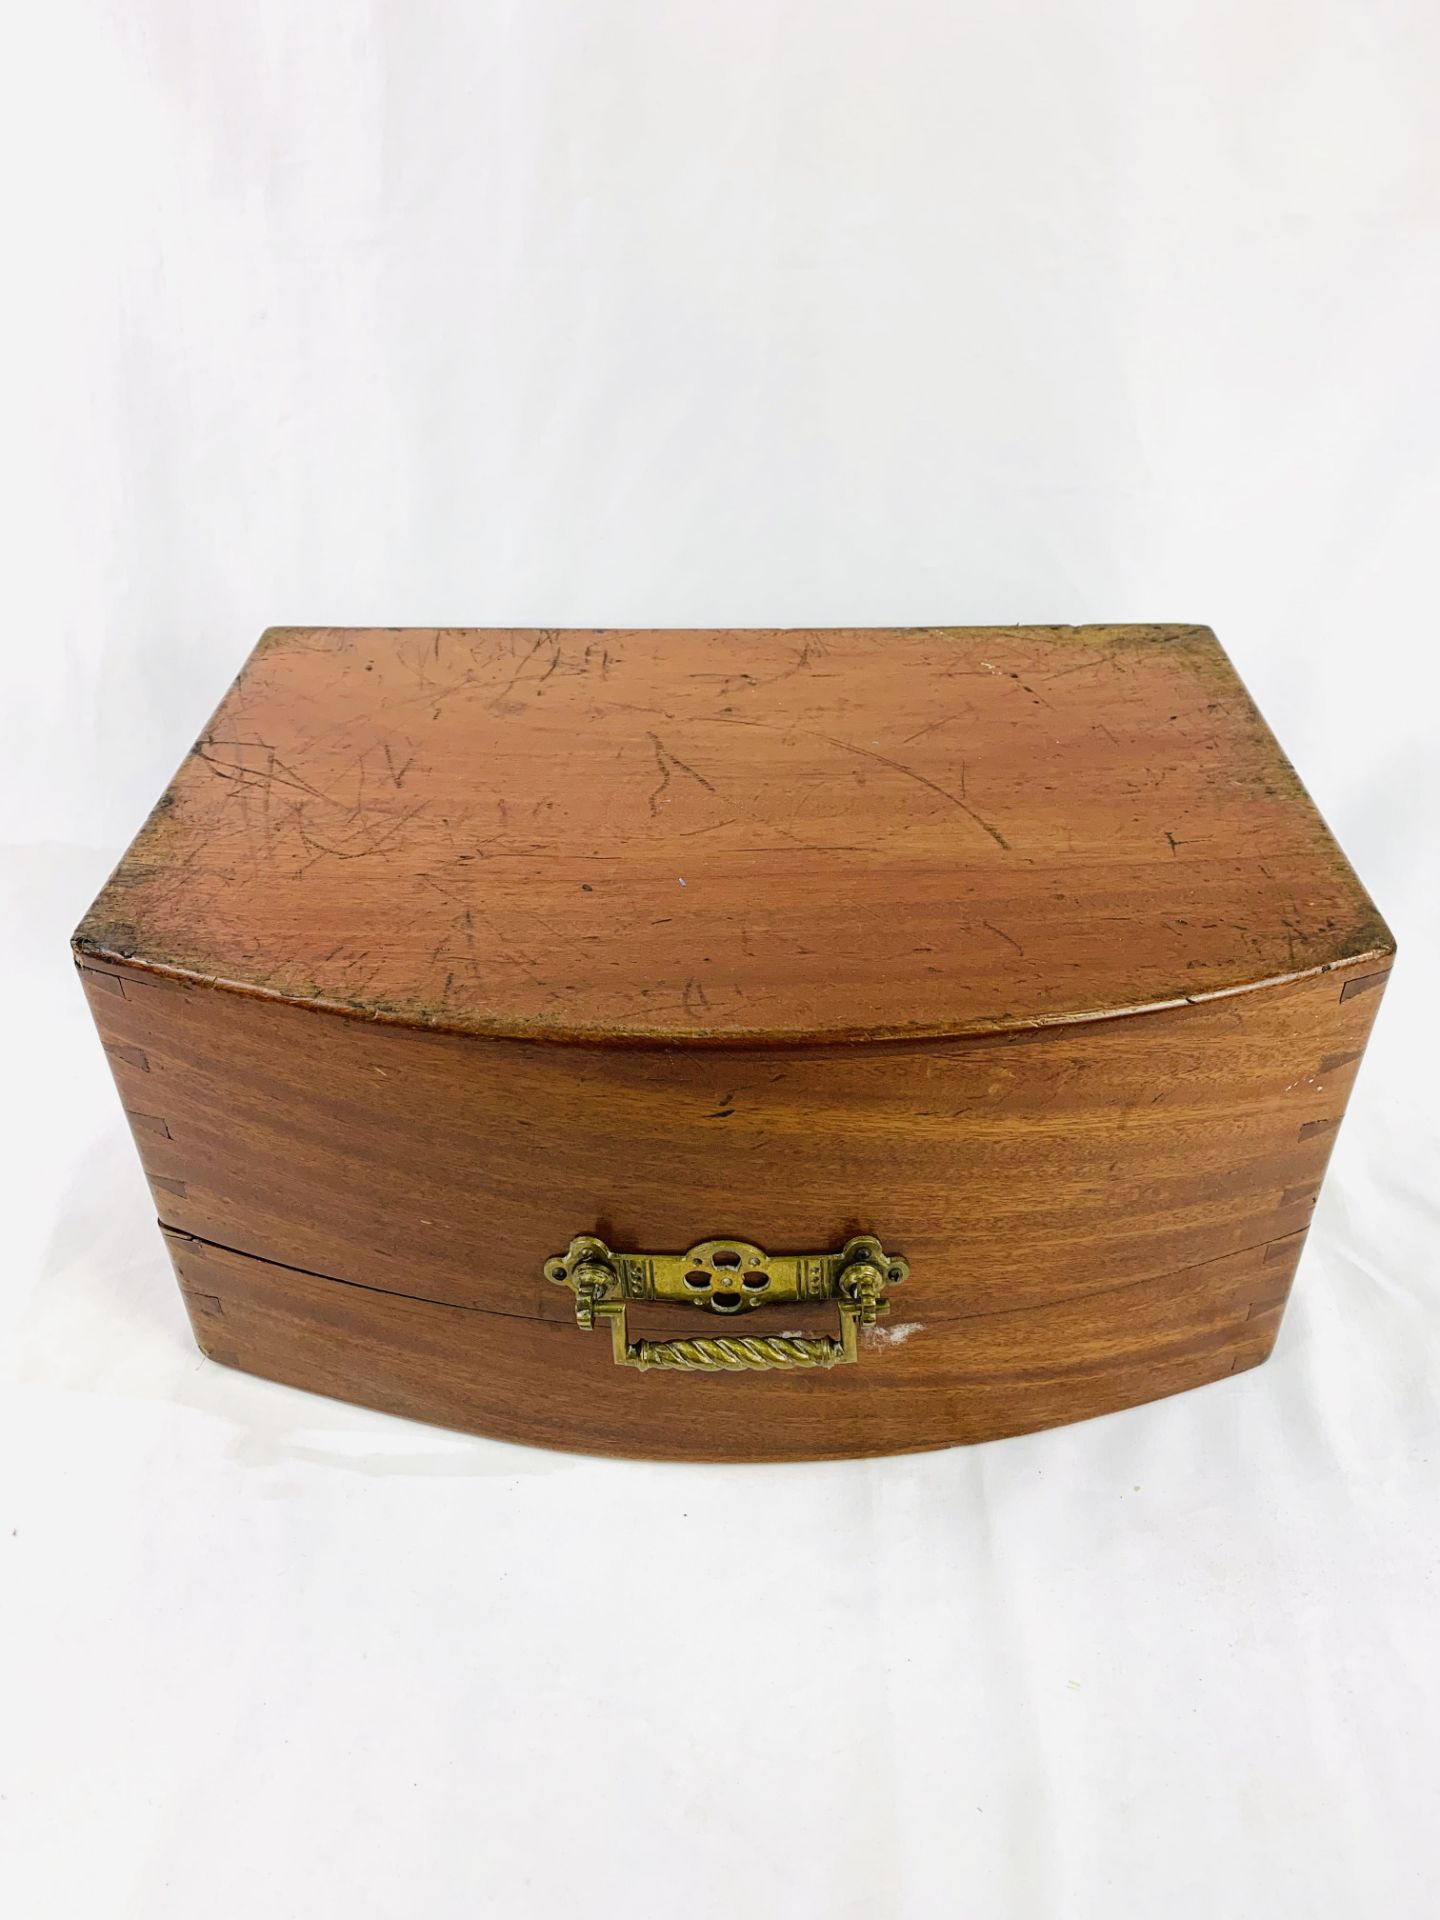 Mahogany side hinging box with brass handle and partially fitted interior, together with other boxes